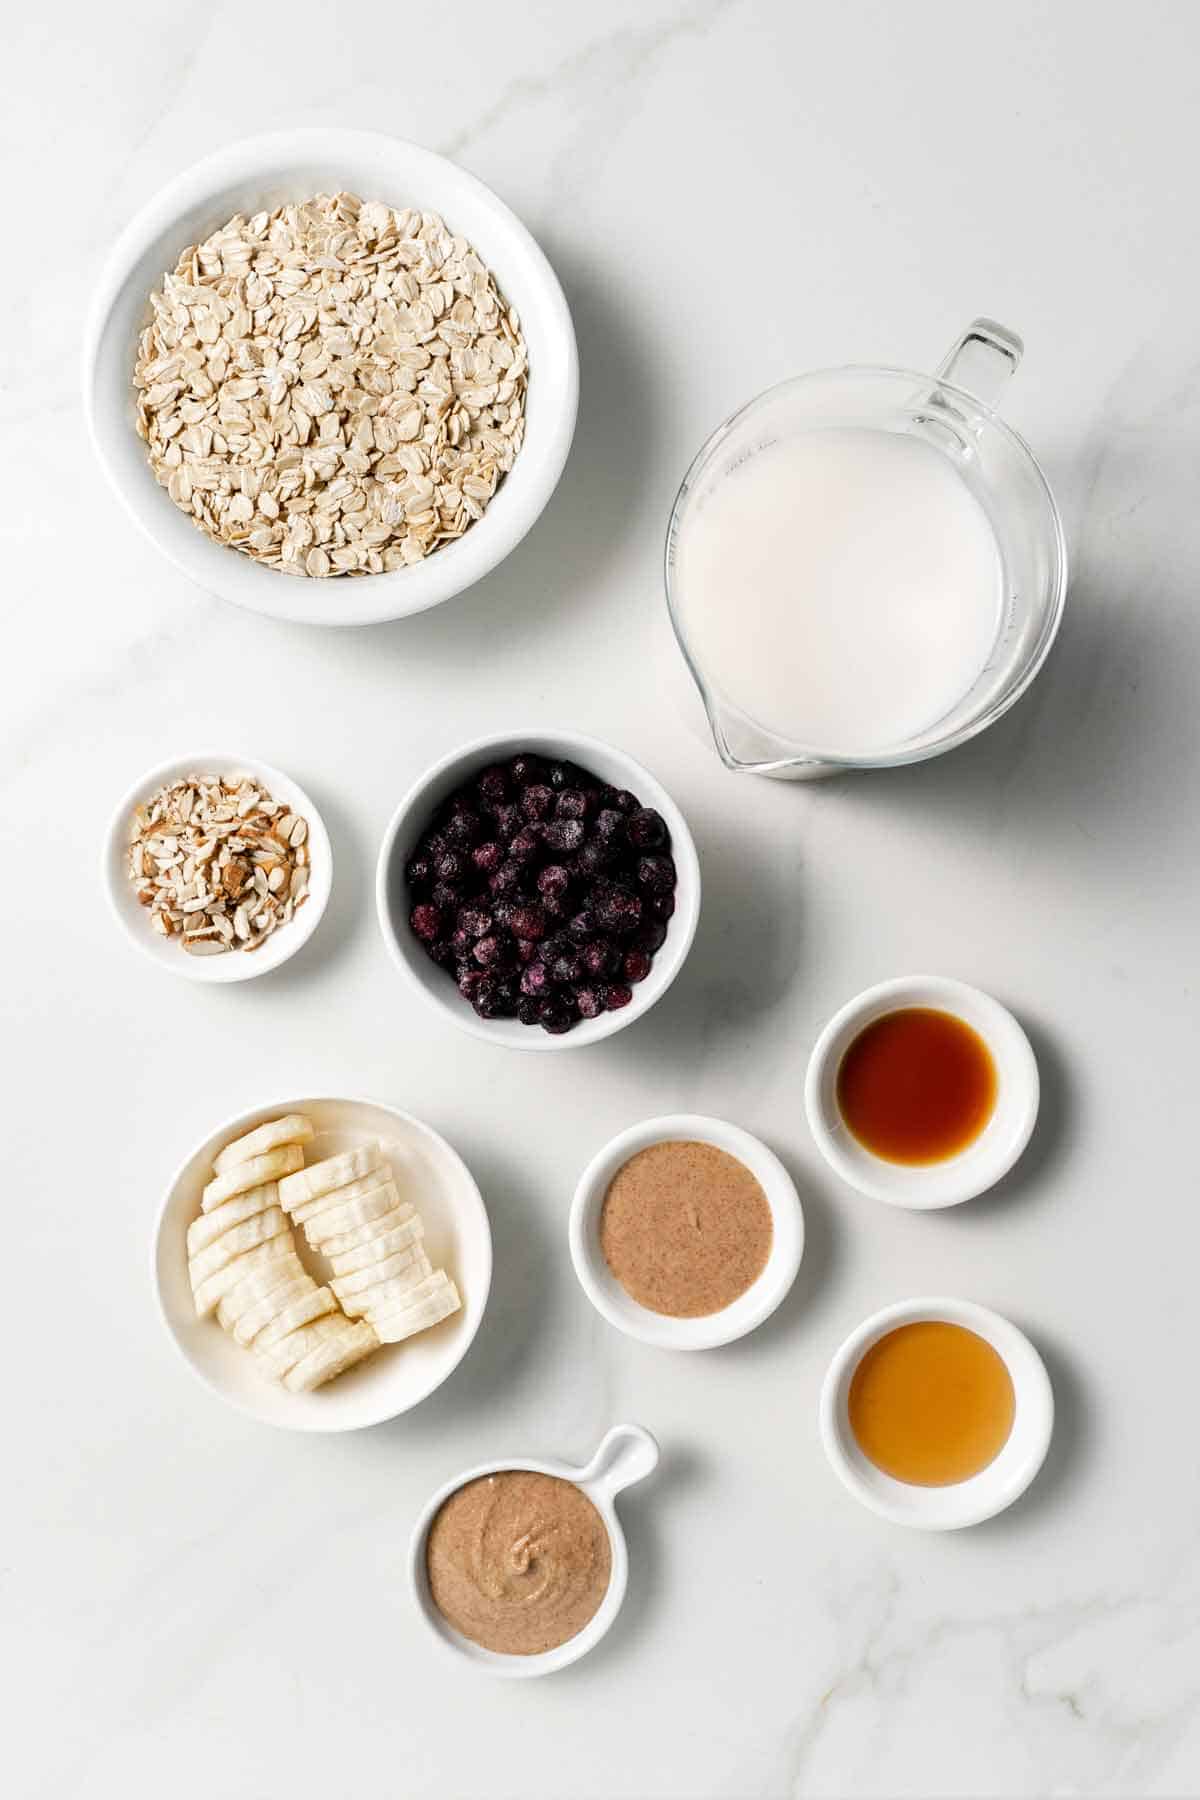 Ingredients needed to make blueberry oats.